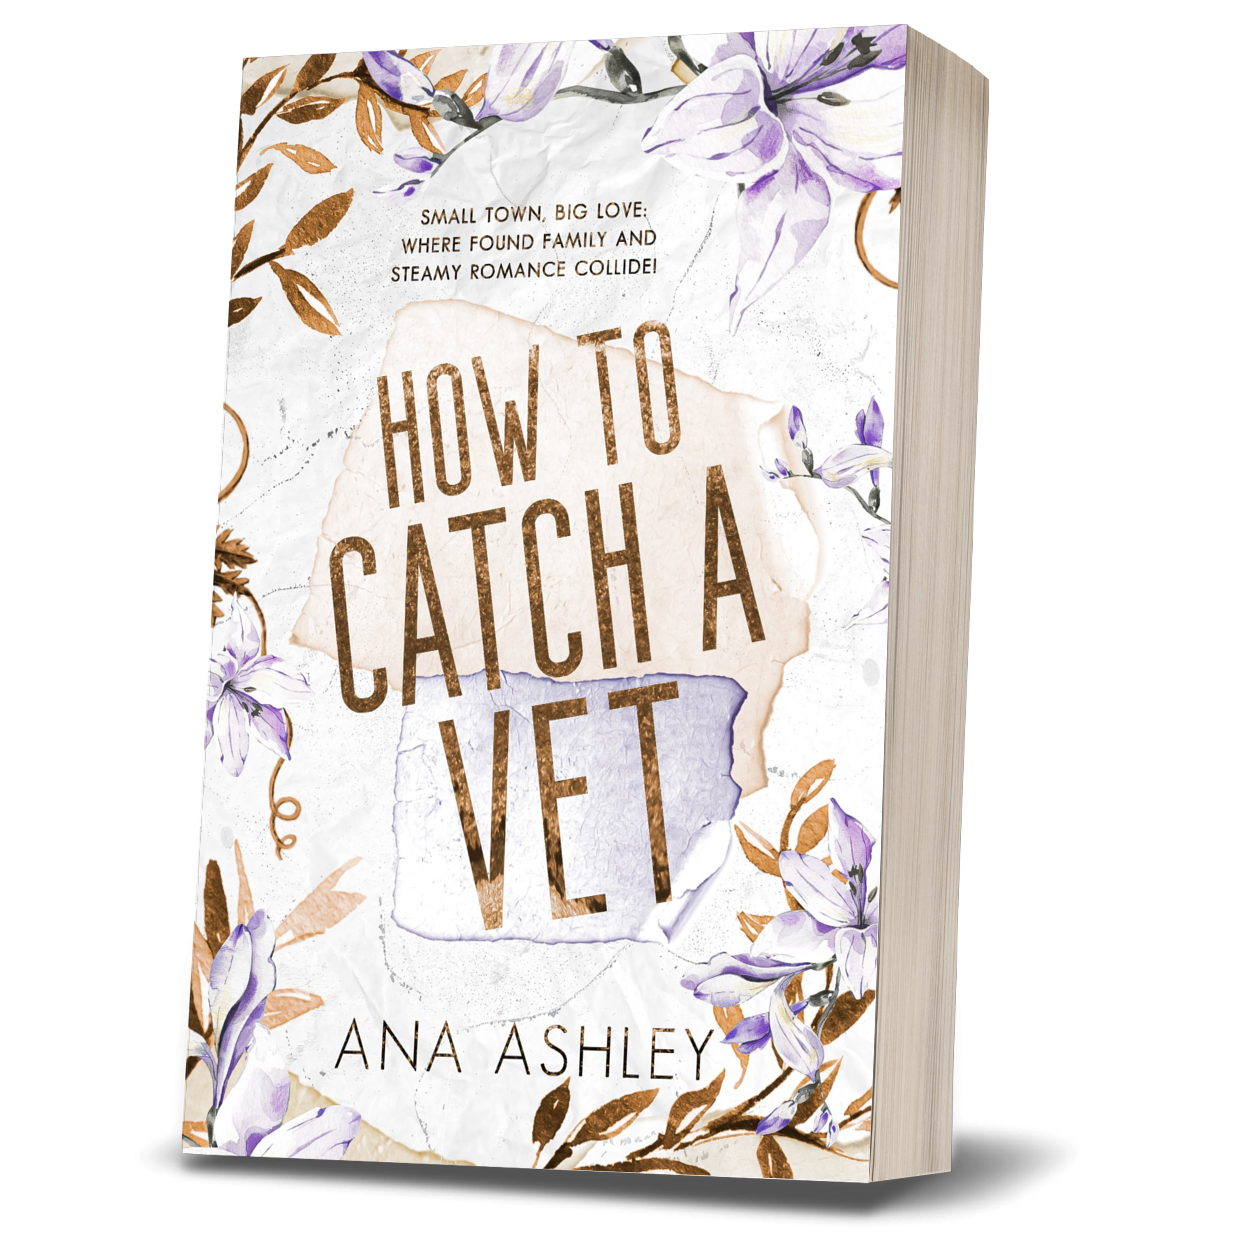 How To Catch A Vet - Chester Falls Series Book 6 (Special Edition Paperback)